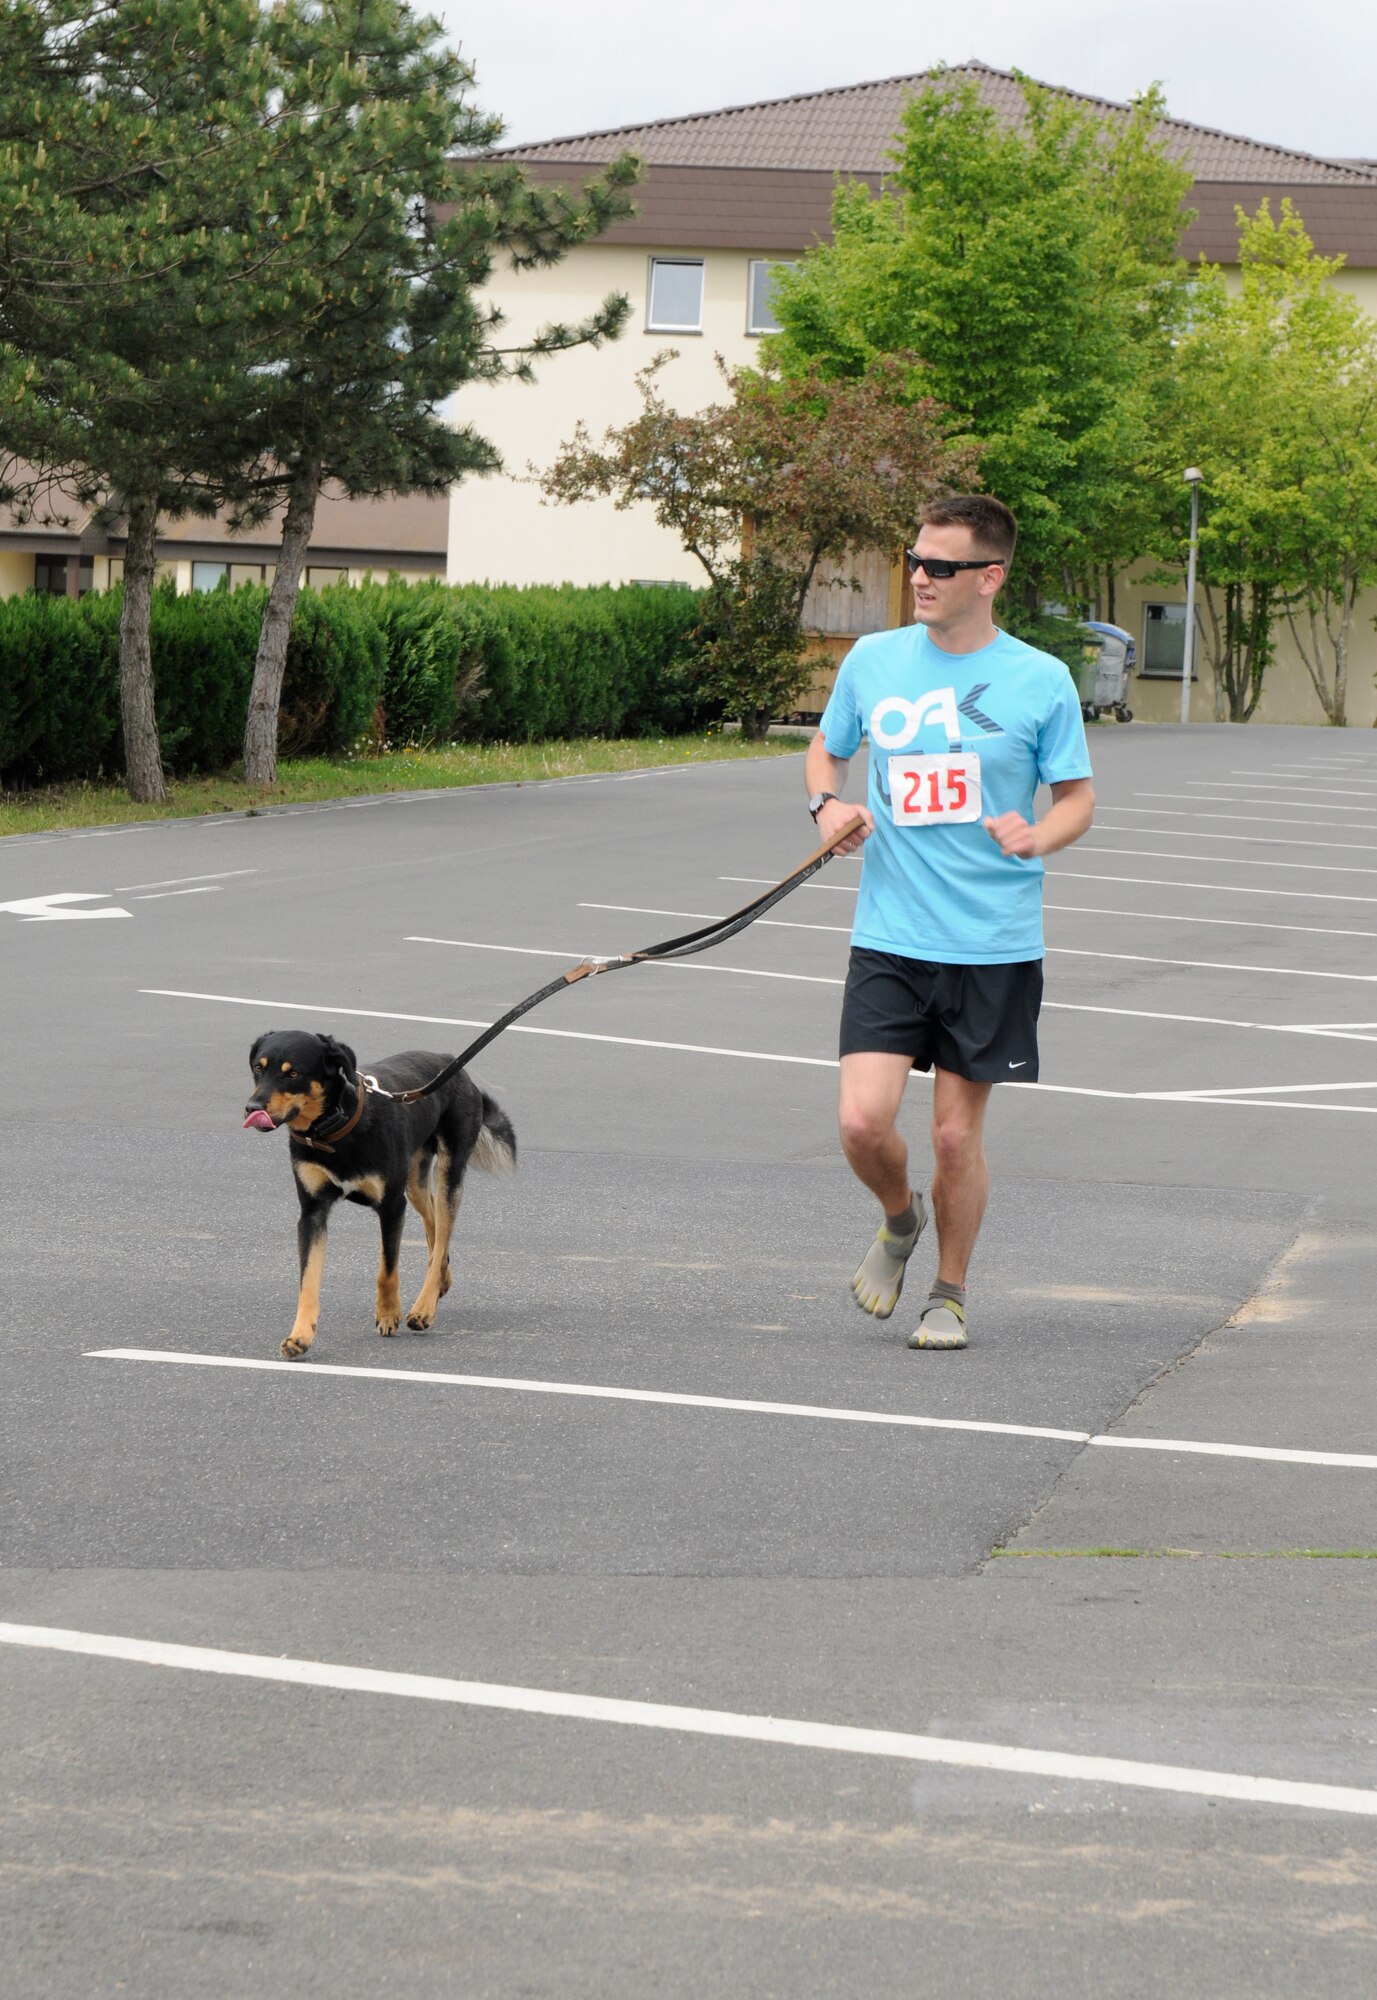 SPANGDAHLEM AIR BASE, Germany – Nathanael Callon and his dog, Robby, run to the finish line during the U.S. Air Forces in Europe half marathon at the Skelton Memorial Fitness Center here May 14. The USAFE half marathon is an annual event Airmen from around Europe can participate in. Each run was split into different categories based on age and gender. (U.S. Air Force photo/Airman 1st Class Brittney Frees)